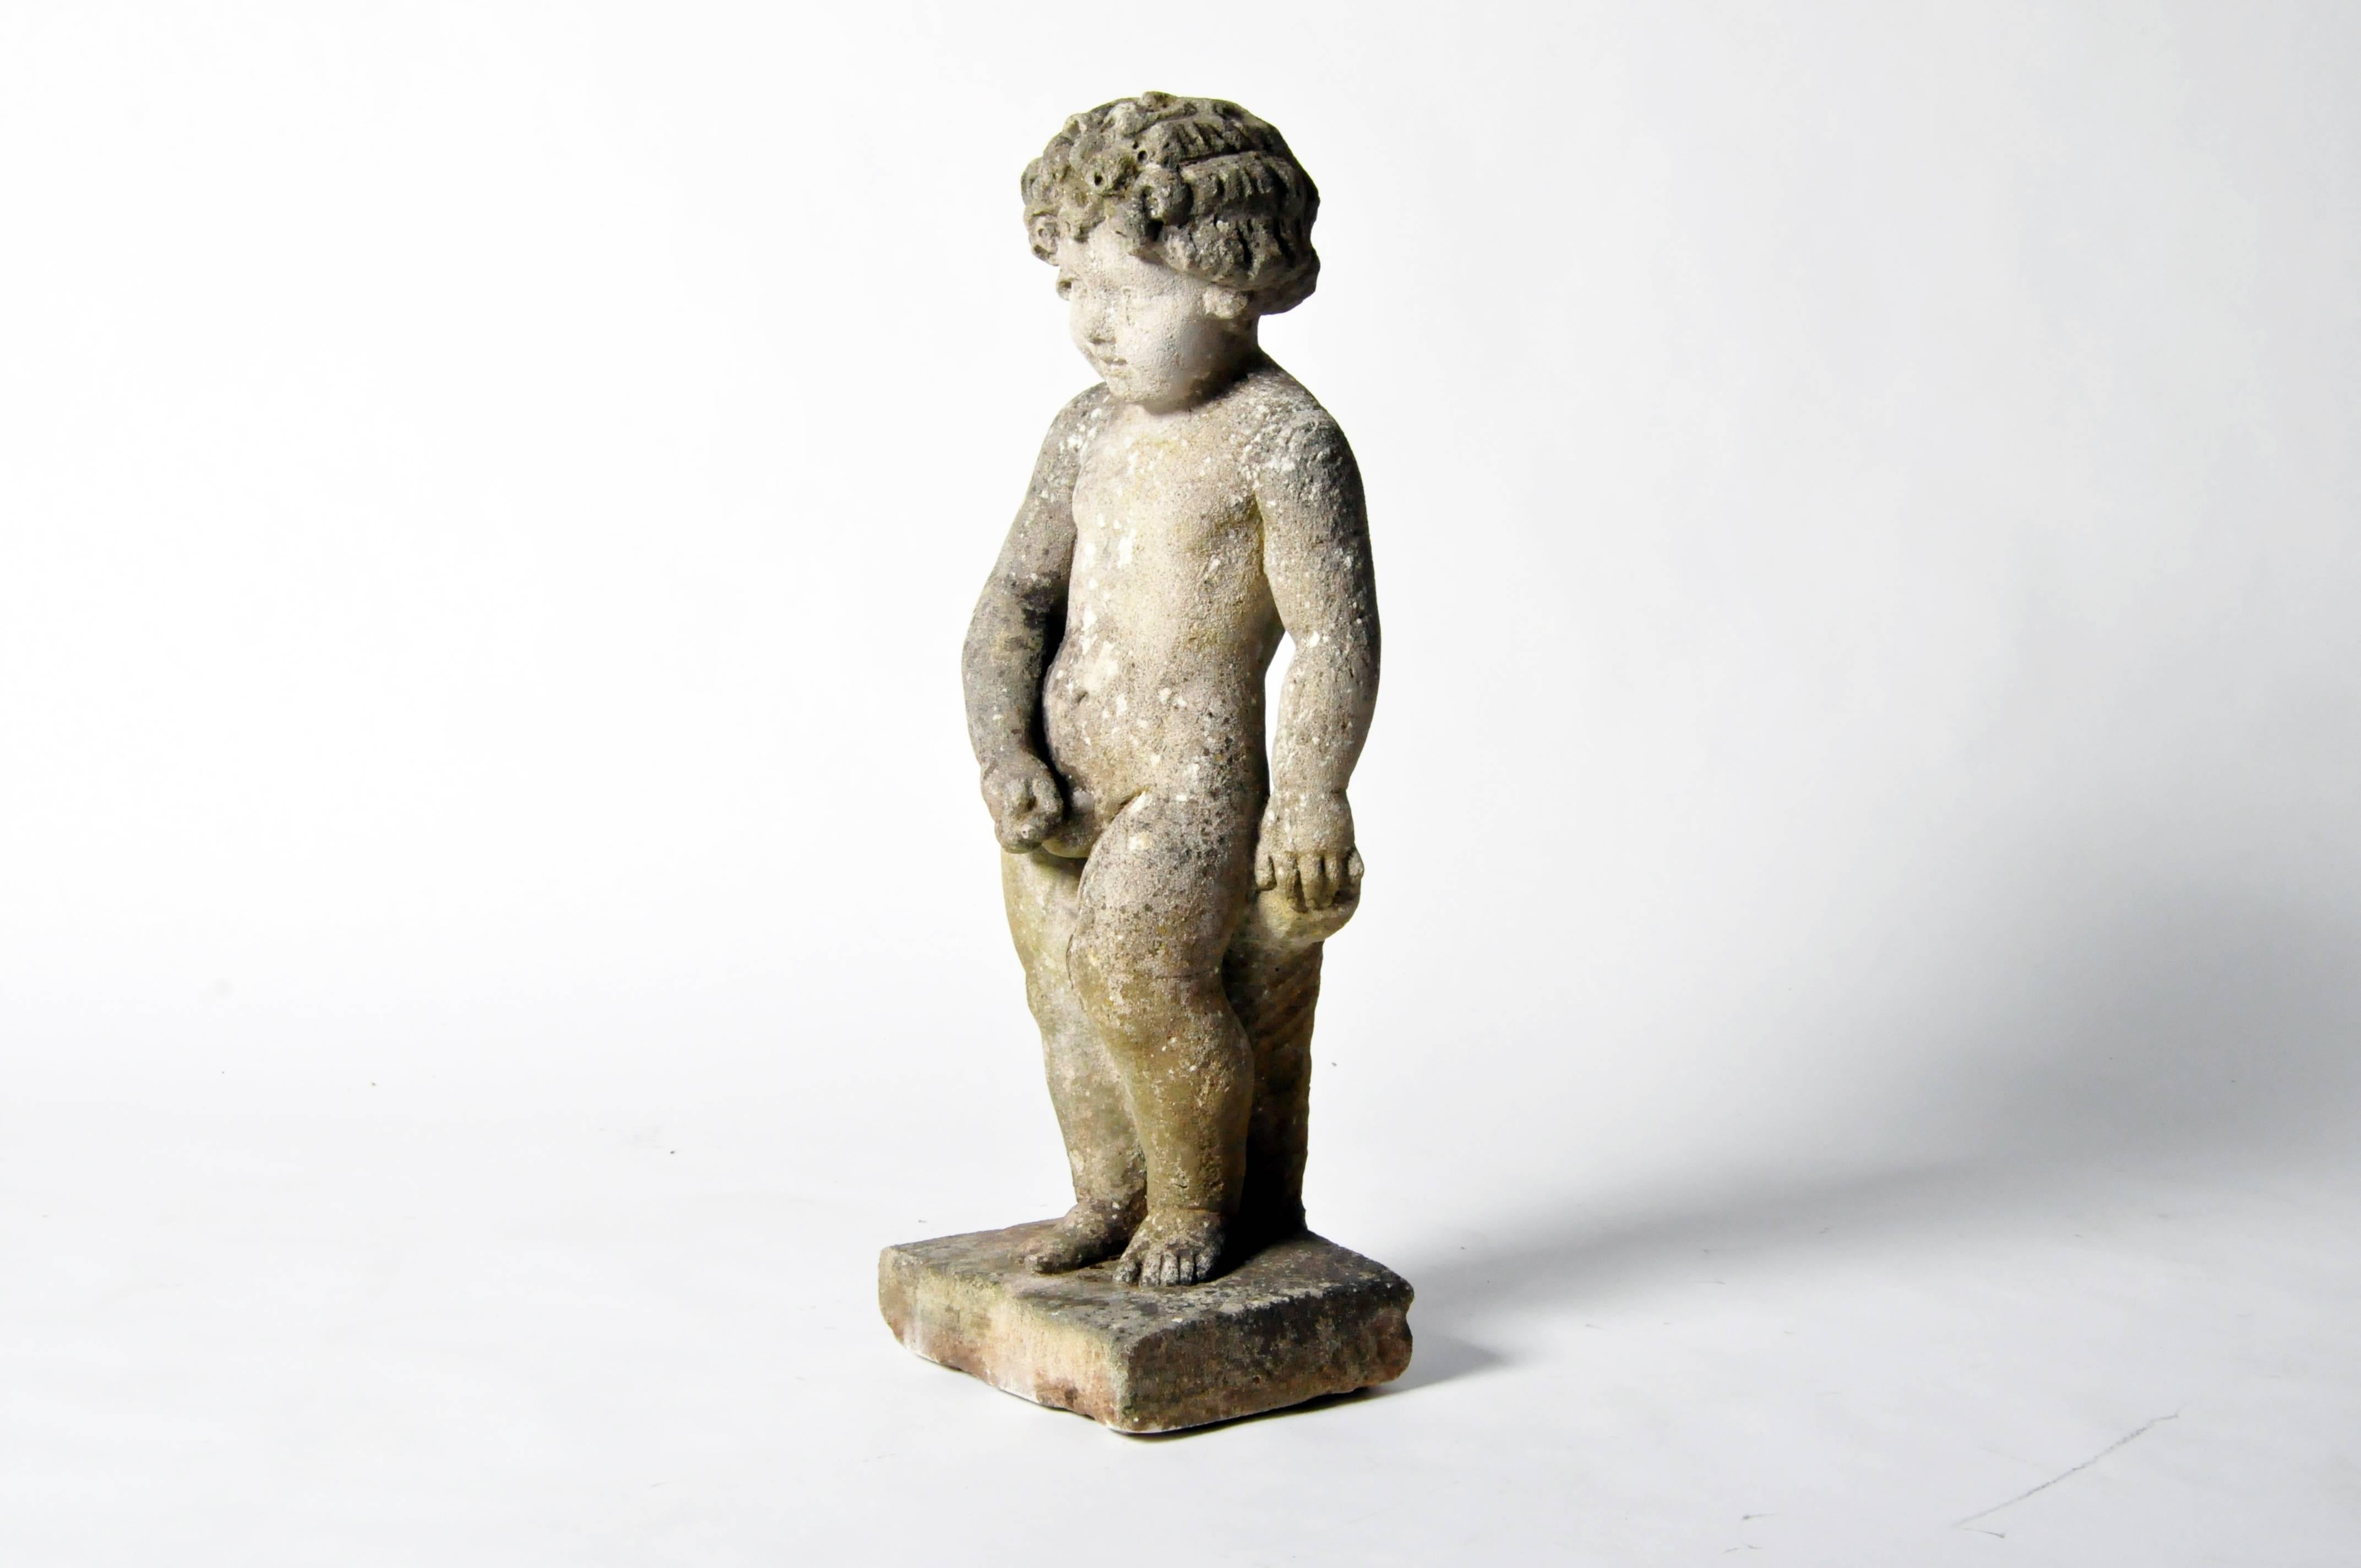 This naturalistic reproduction bears a striking resemblance to the iconic bronze figure by sculptor Hieronimus Duquesnoy in Brussels.